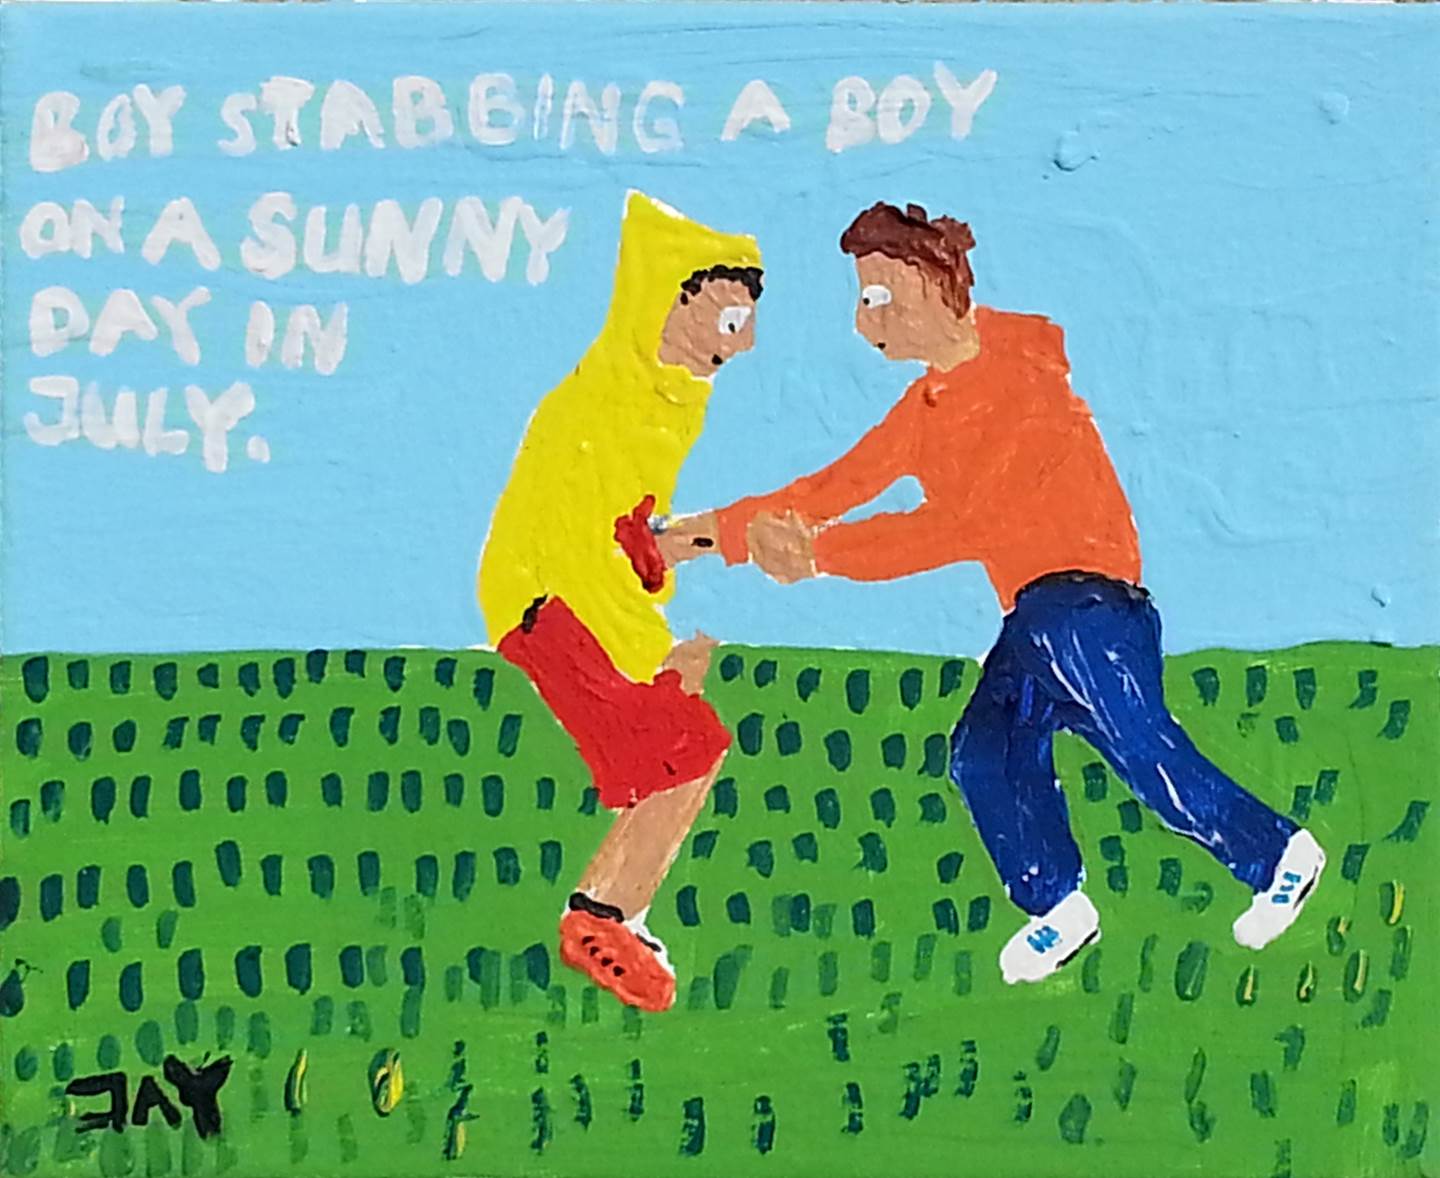 Bad Painting number 05: Boy stabbing a boy on a sunny day in July, original Figure humaine Acrylique La peinture par Jay Rechsteiner